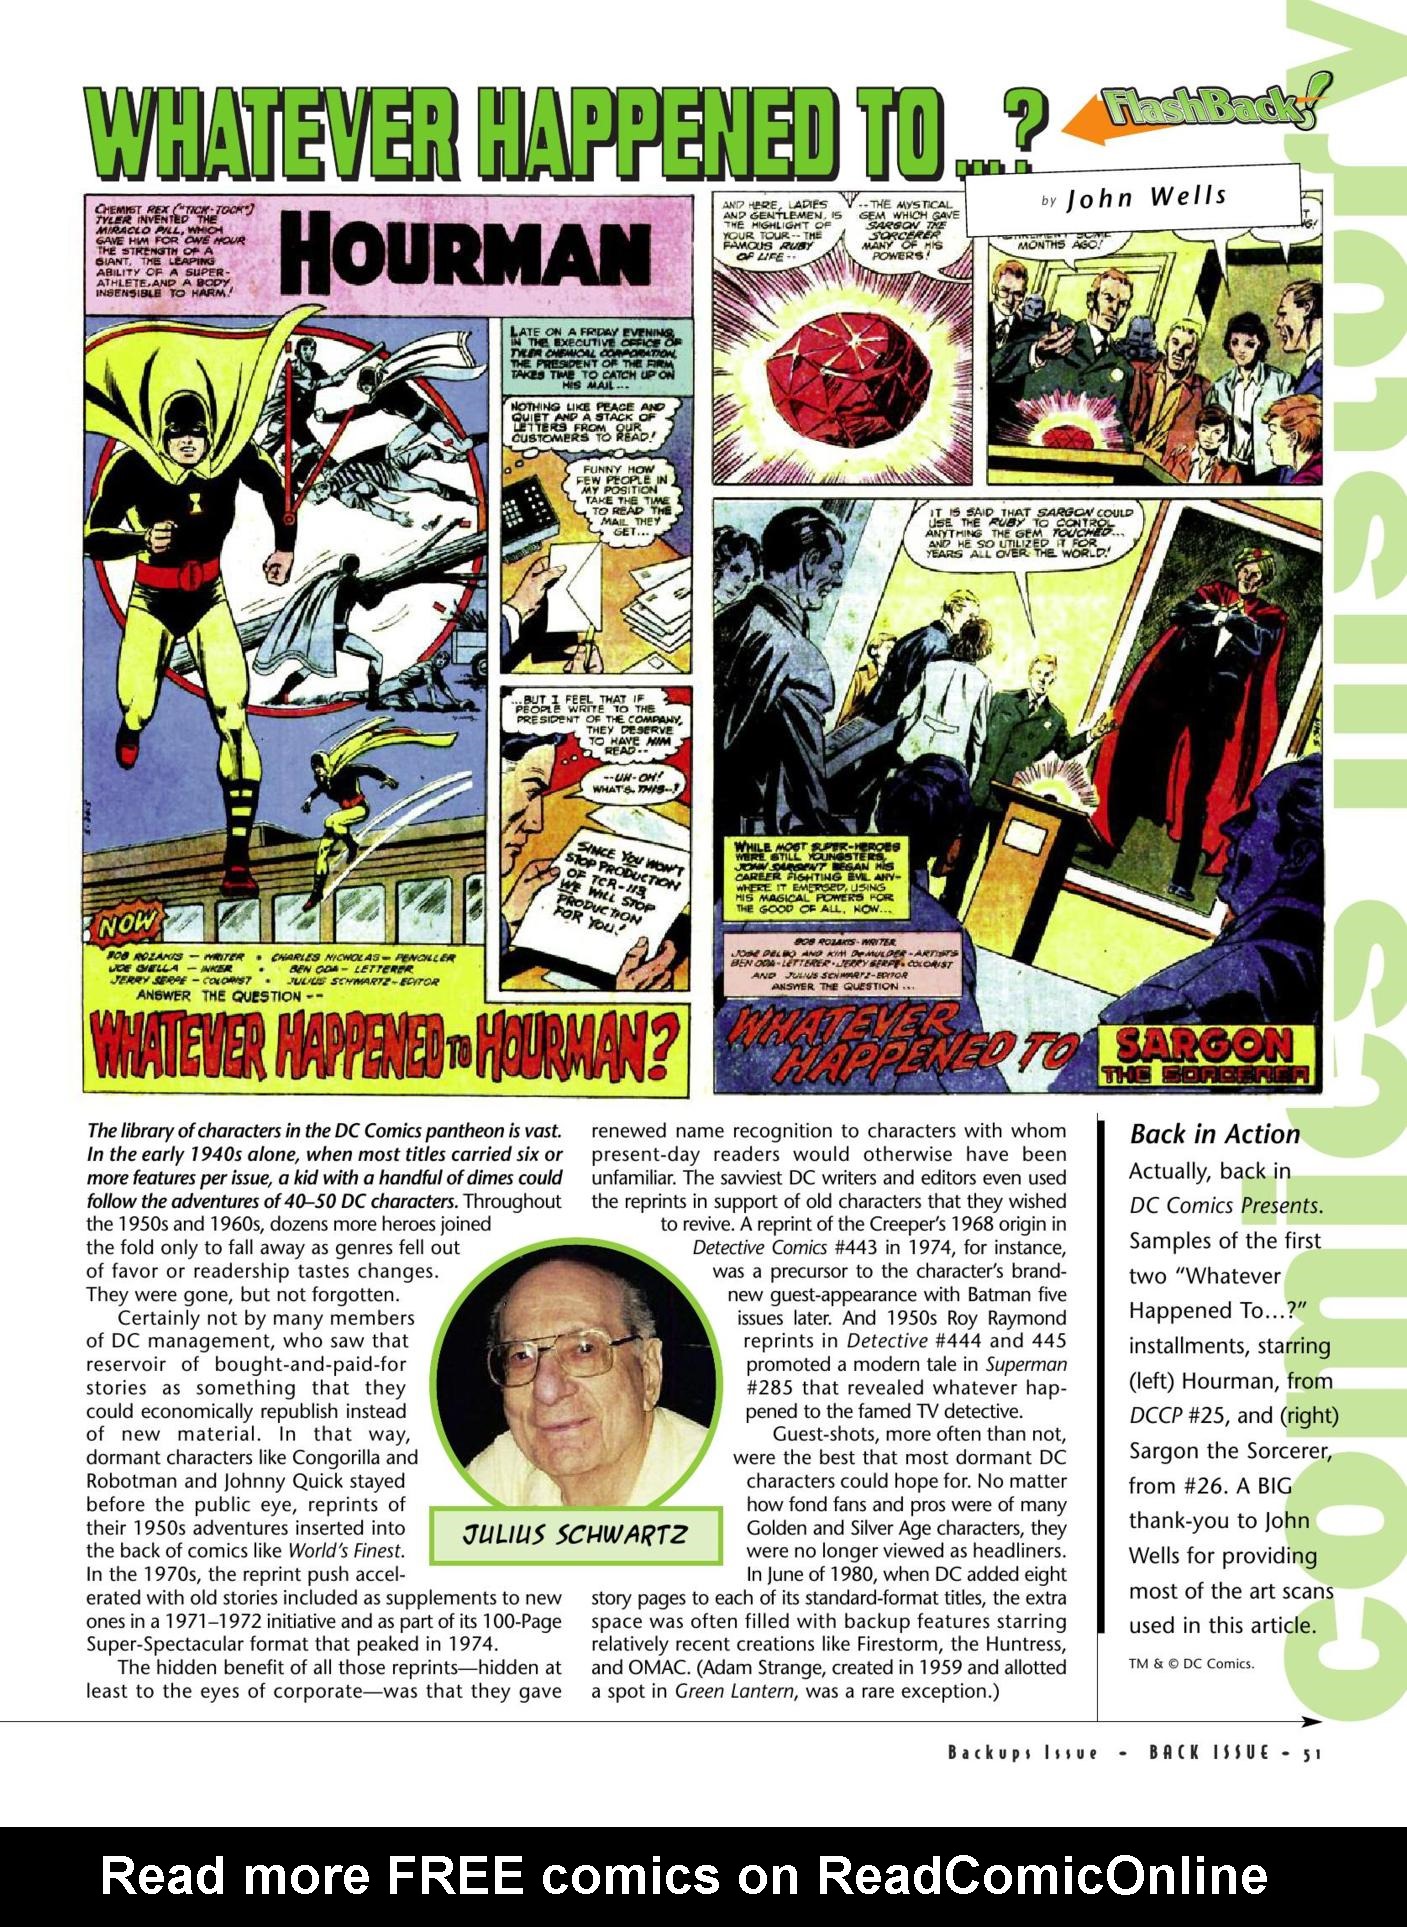 Read online Back Issue comic -  Issue #64 - 53